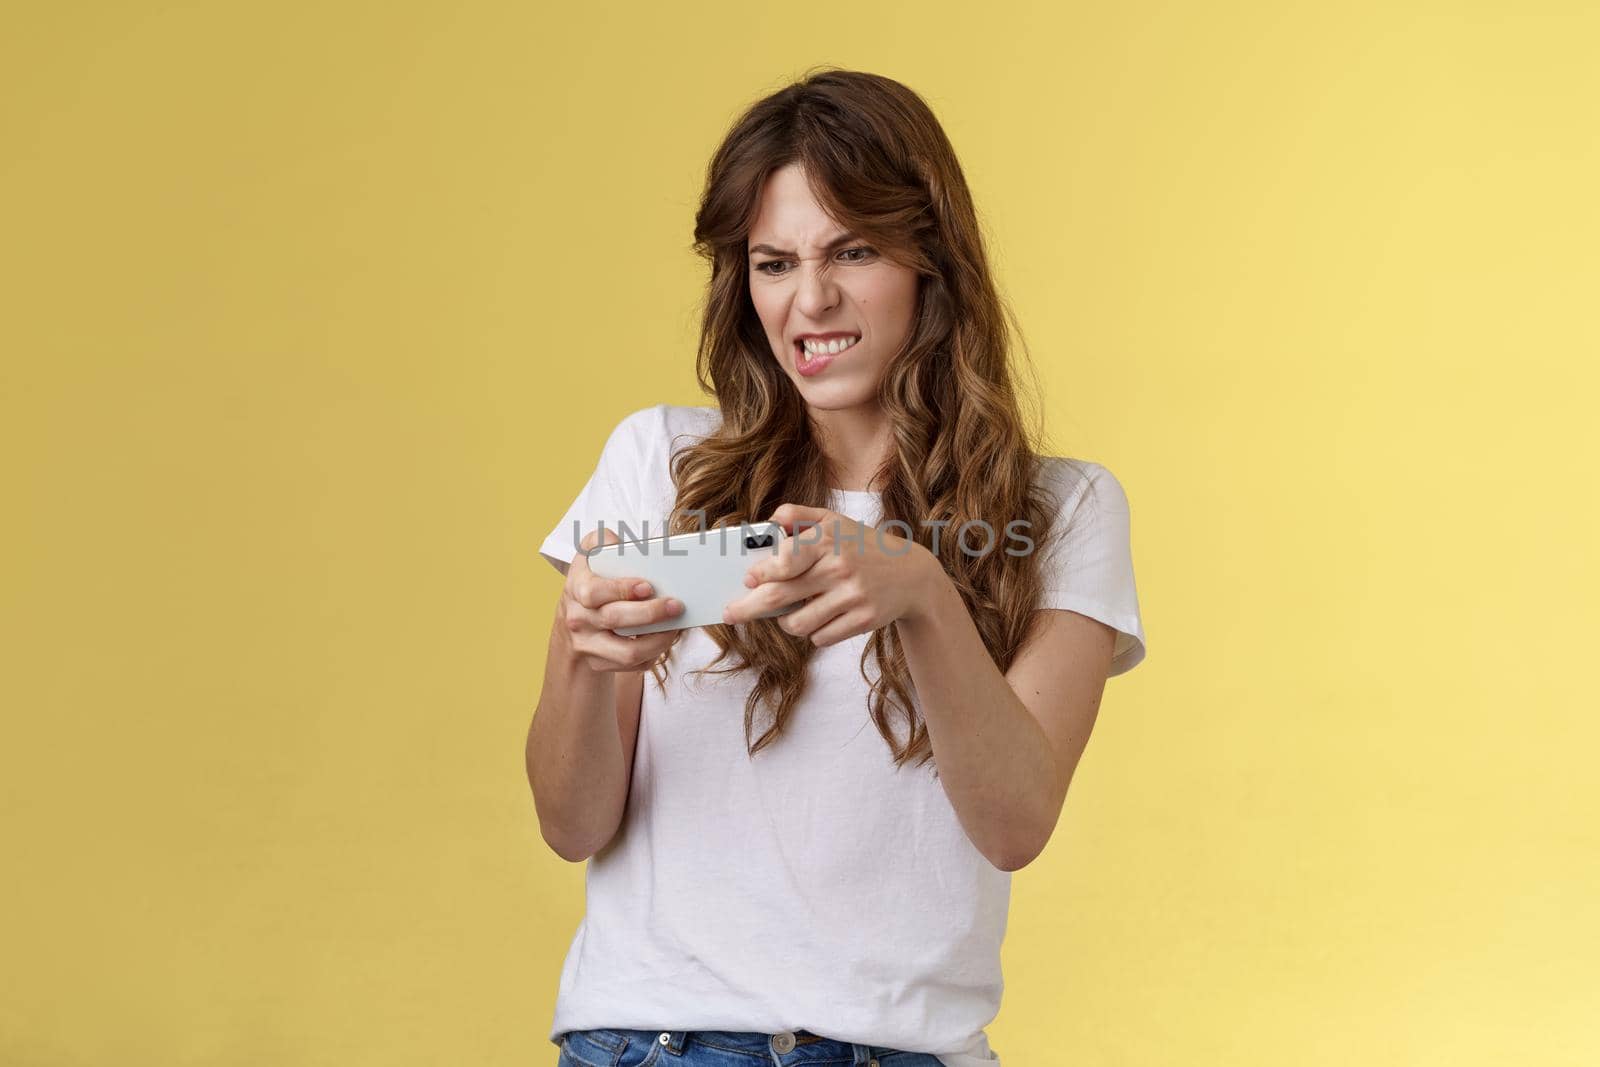 Excited focused playful enthusiastic geeky attractive girl trying beat score hold smartphone horizontal grimacing intense look screen playing awesome arcade game yellow background.